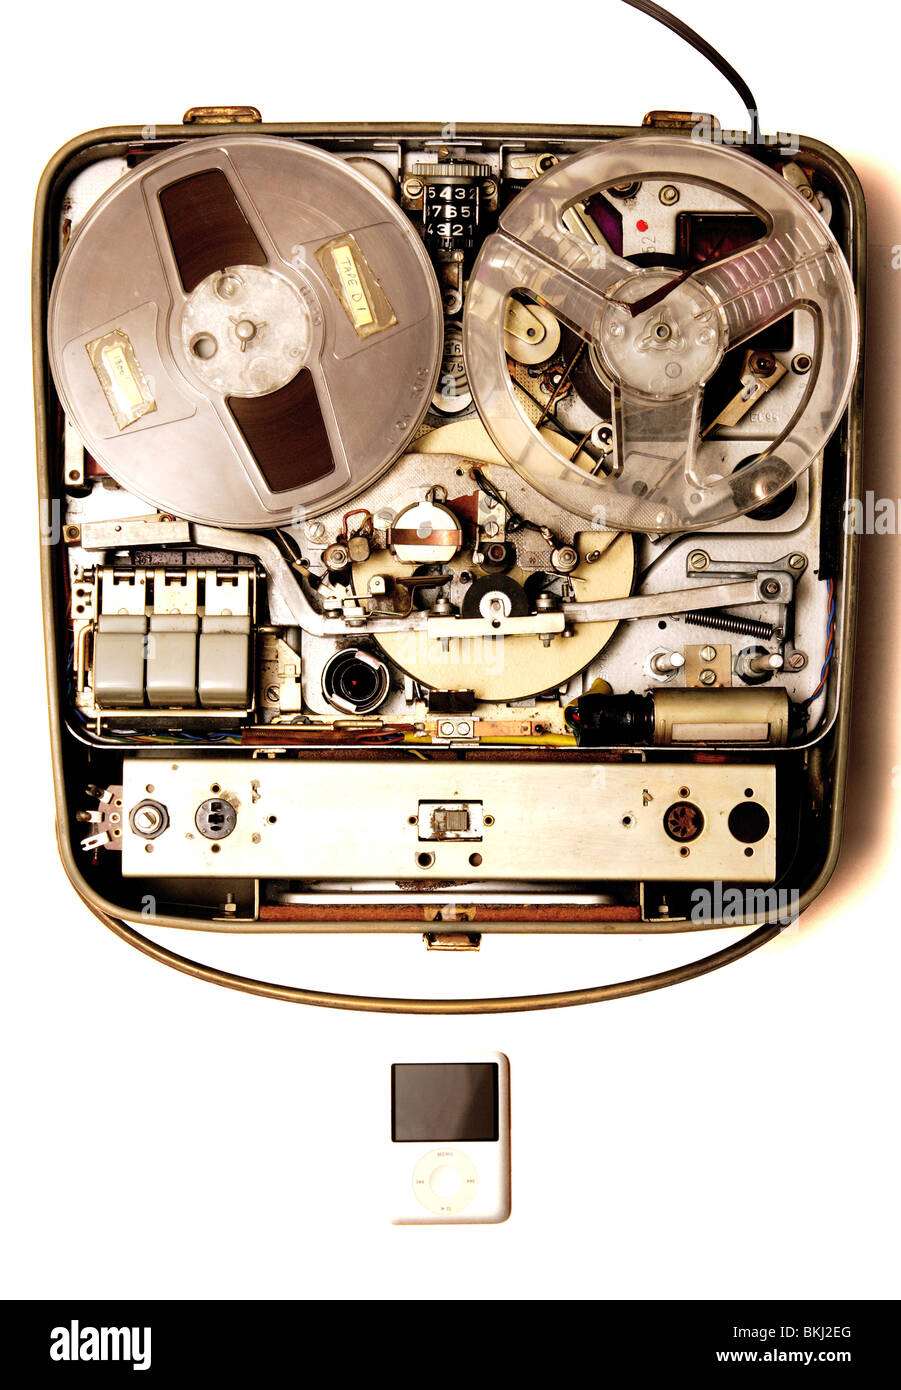 Old fashioned reel to reel tape recorder next to an ipod mp3